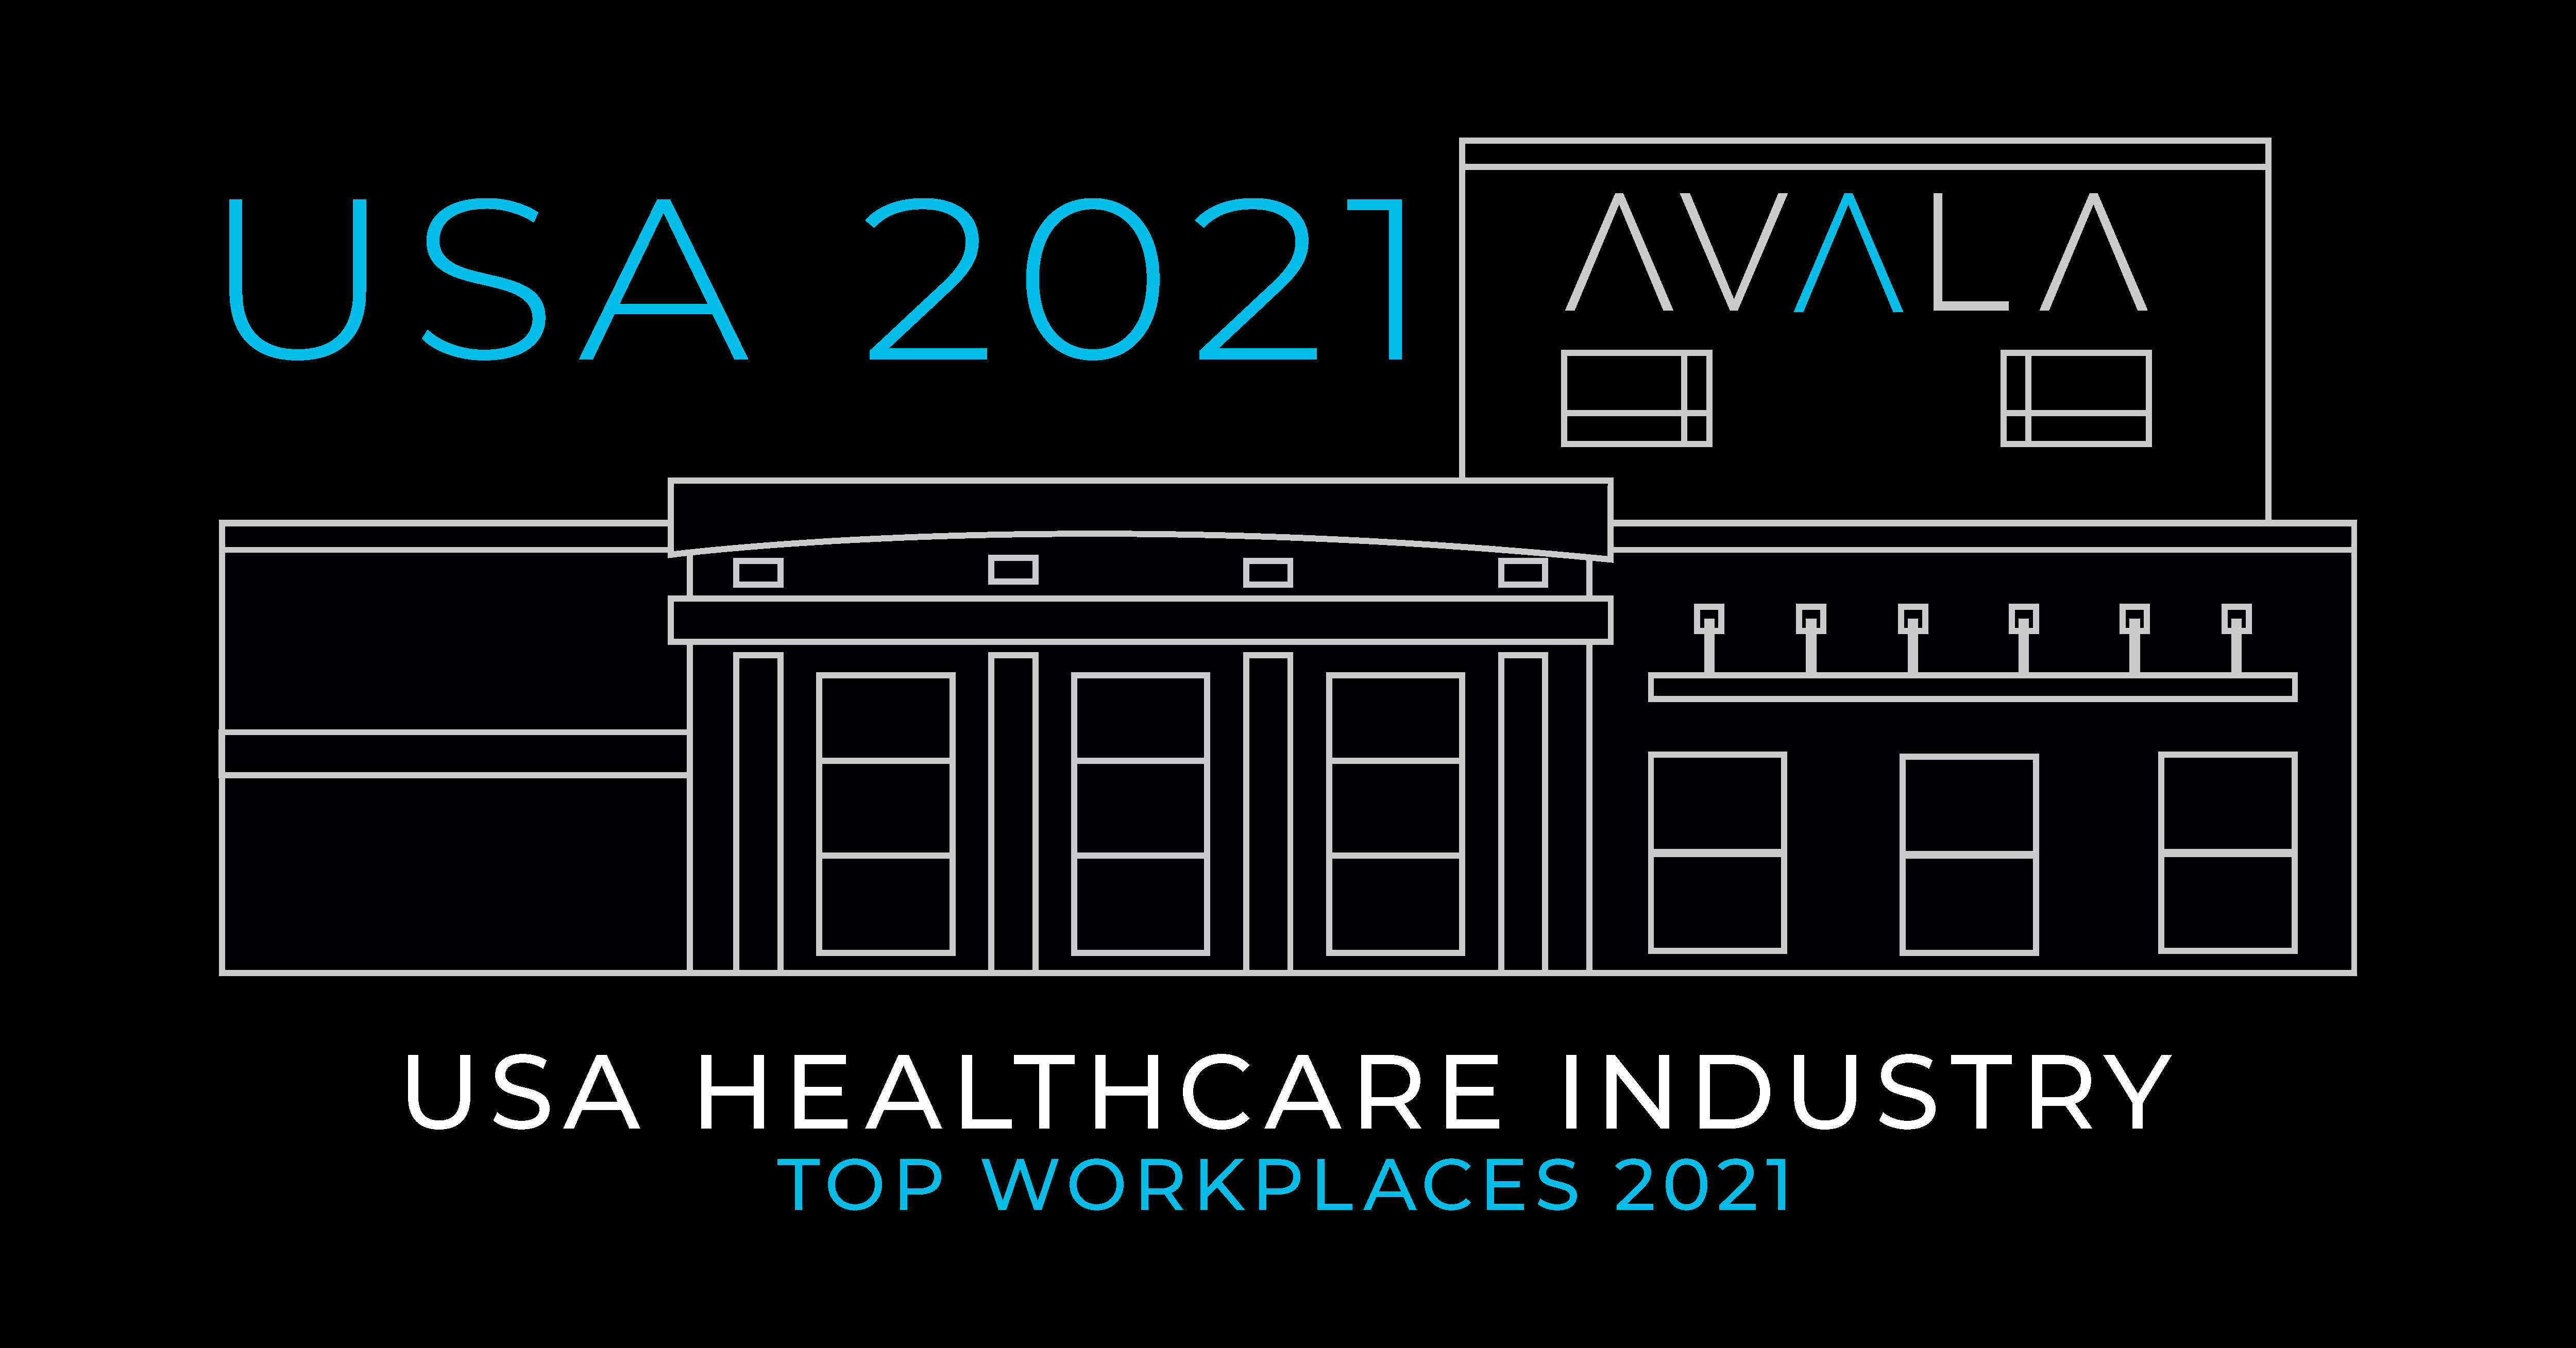 USA Healthcare Industry Top Workplaces 2021 Award